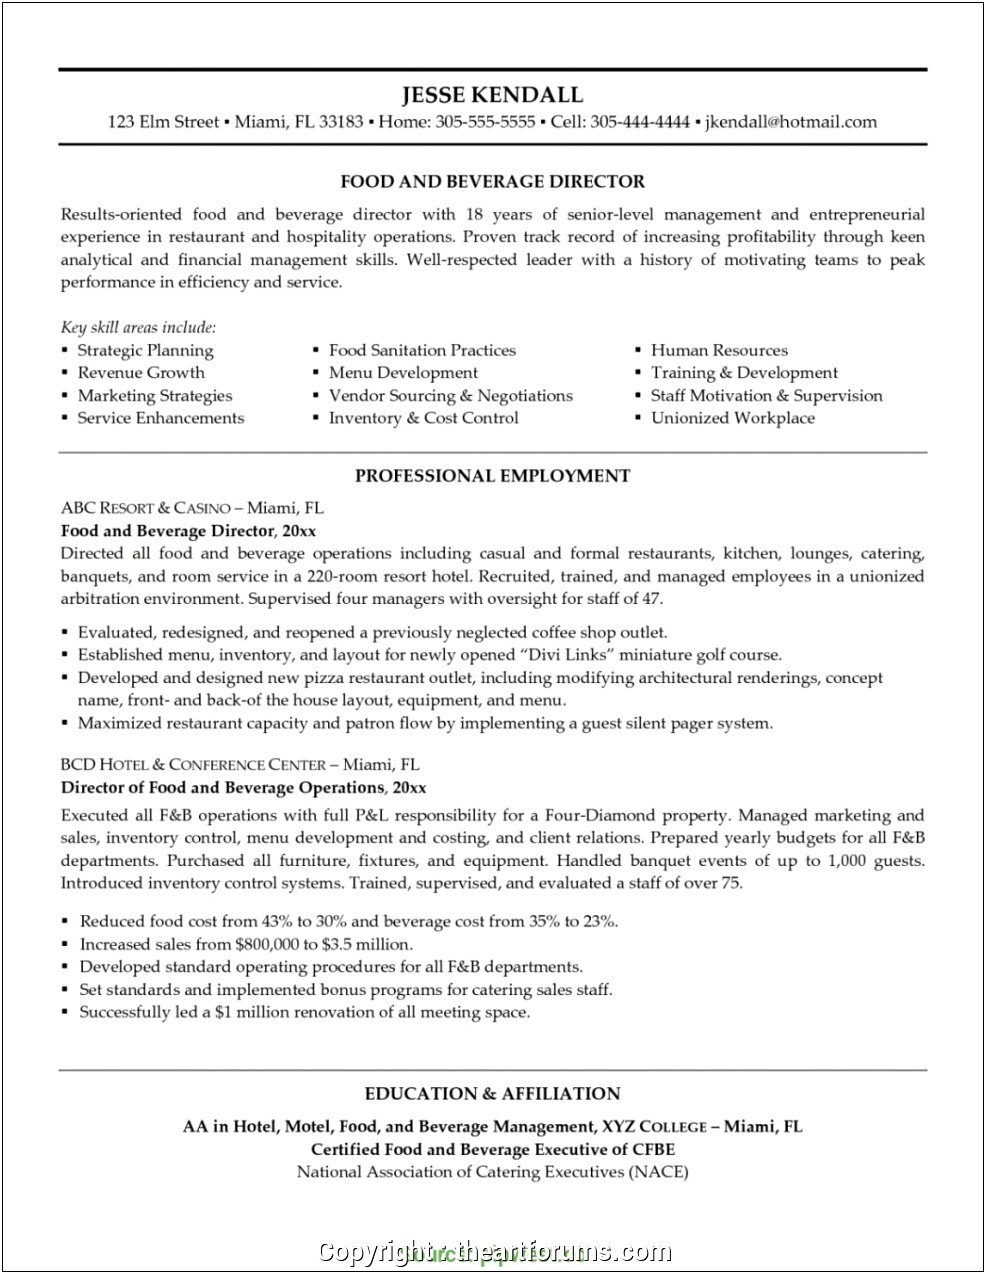 Food And Beverage Manager Resume Objective Examples